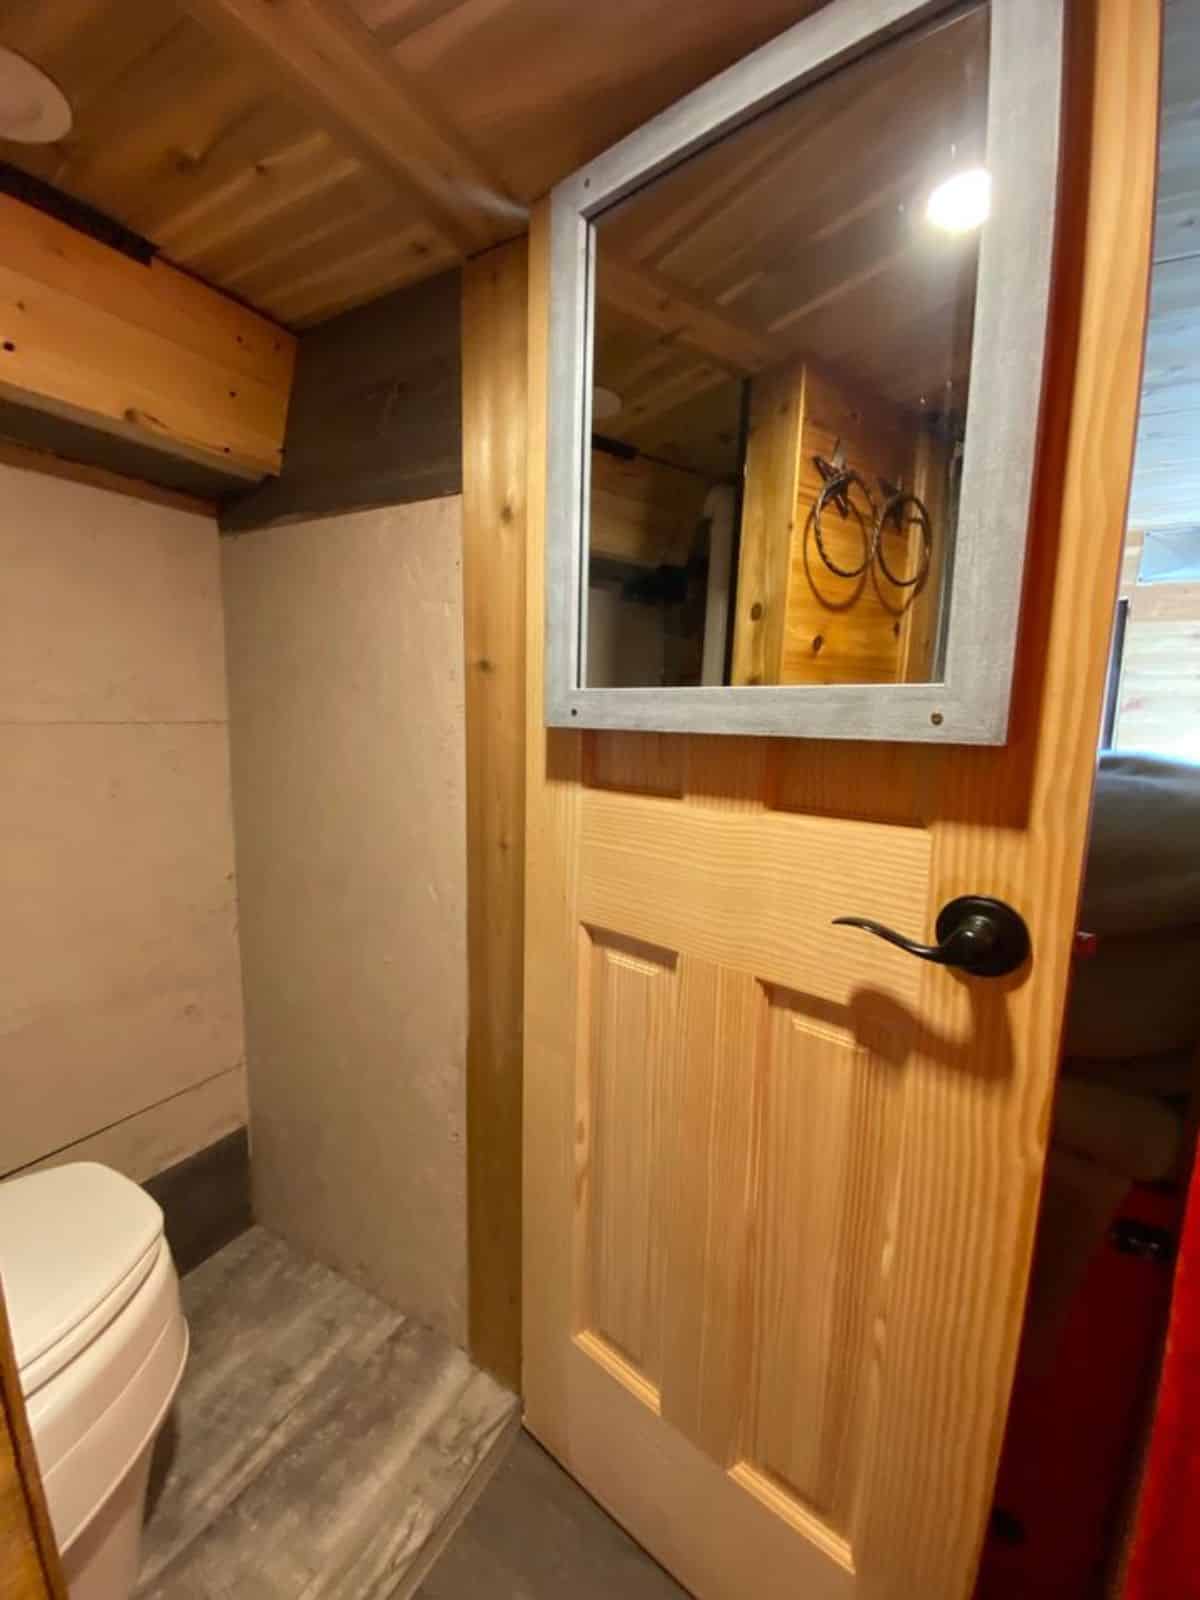 bathroom of converted tiny home has all the standard fitings